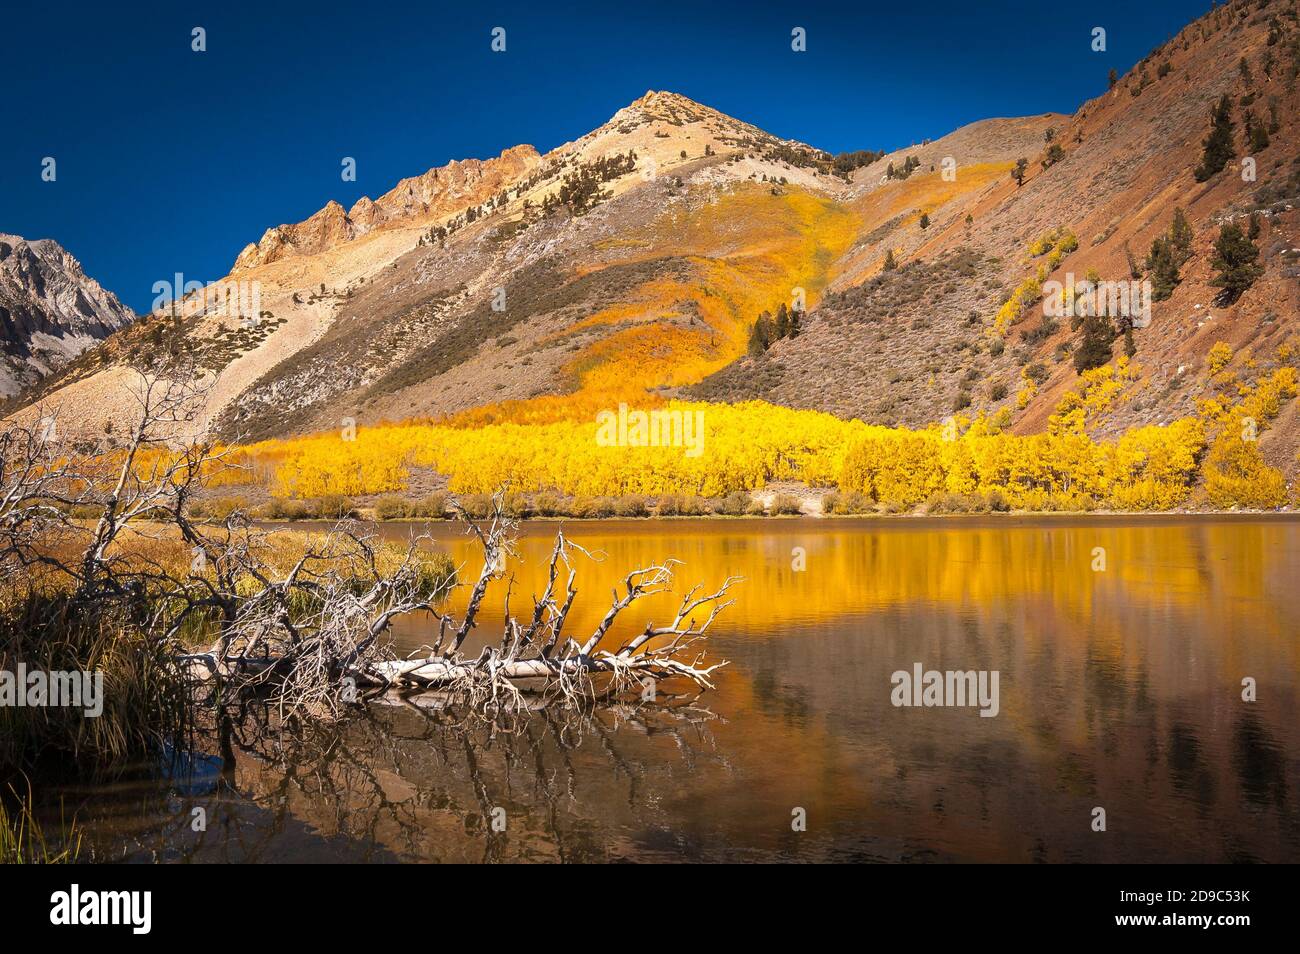 Fall colors reflecting on a quiet lake in the Sierra Nevada mountains. Stock Photo